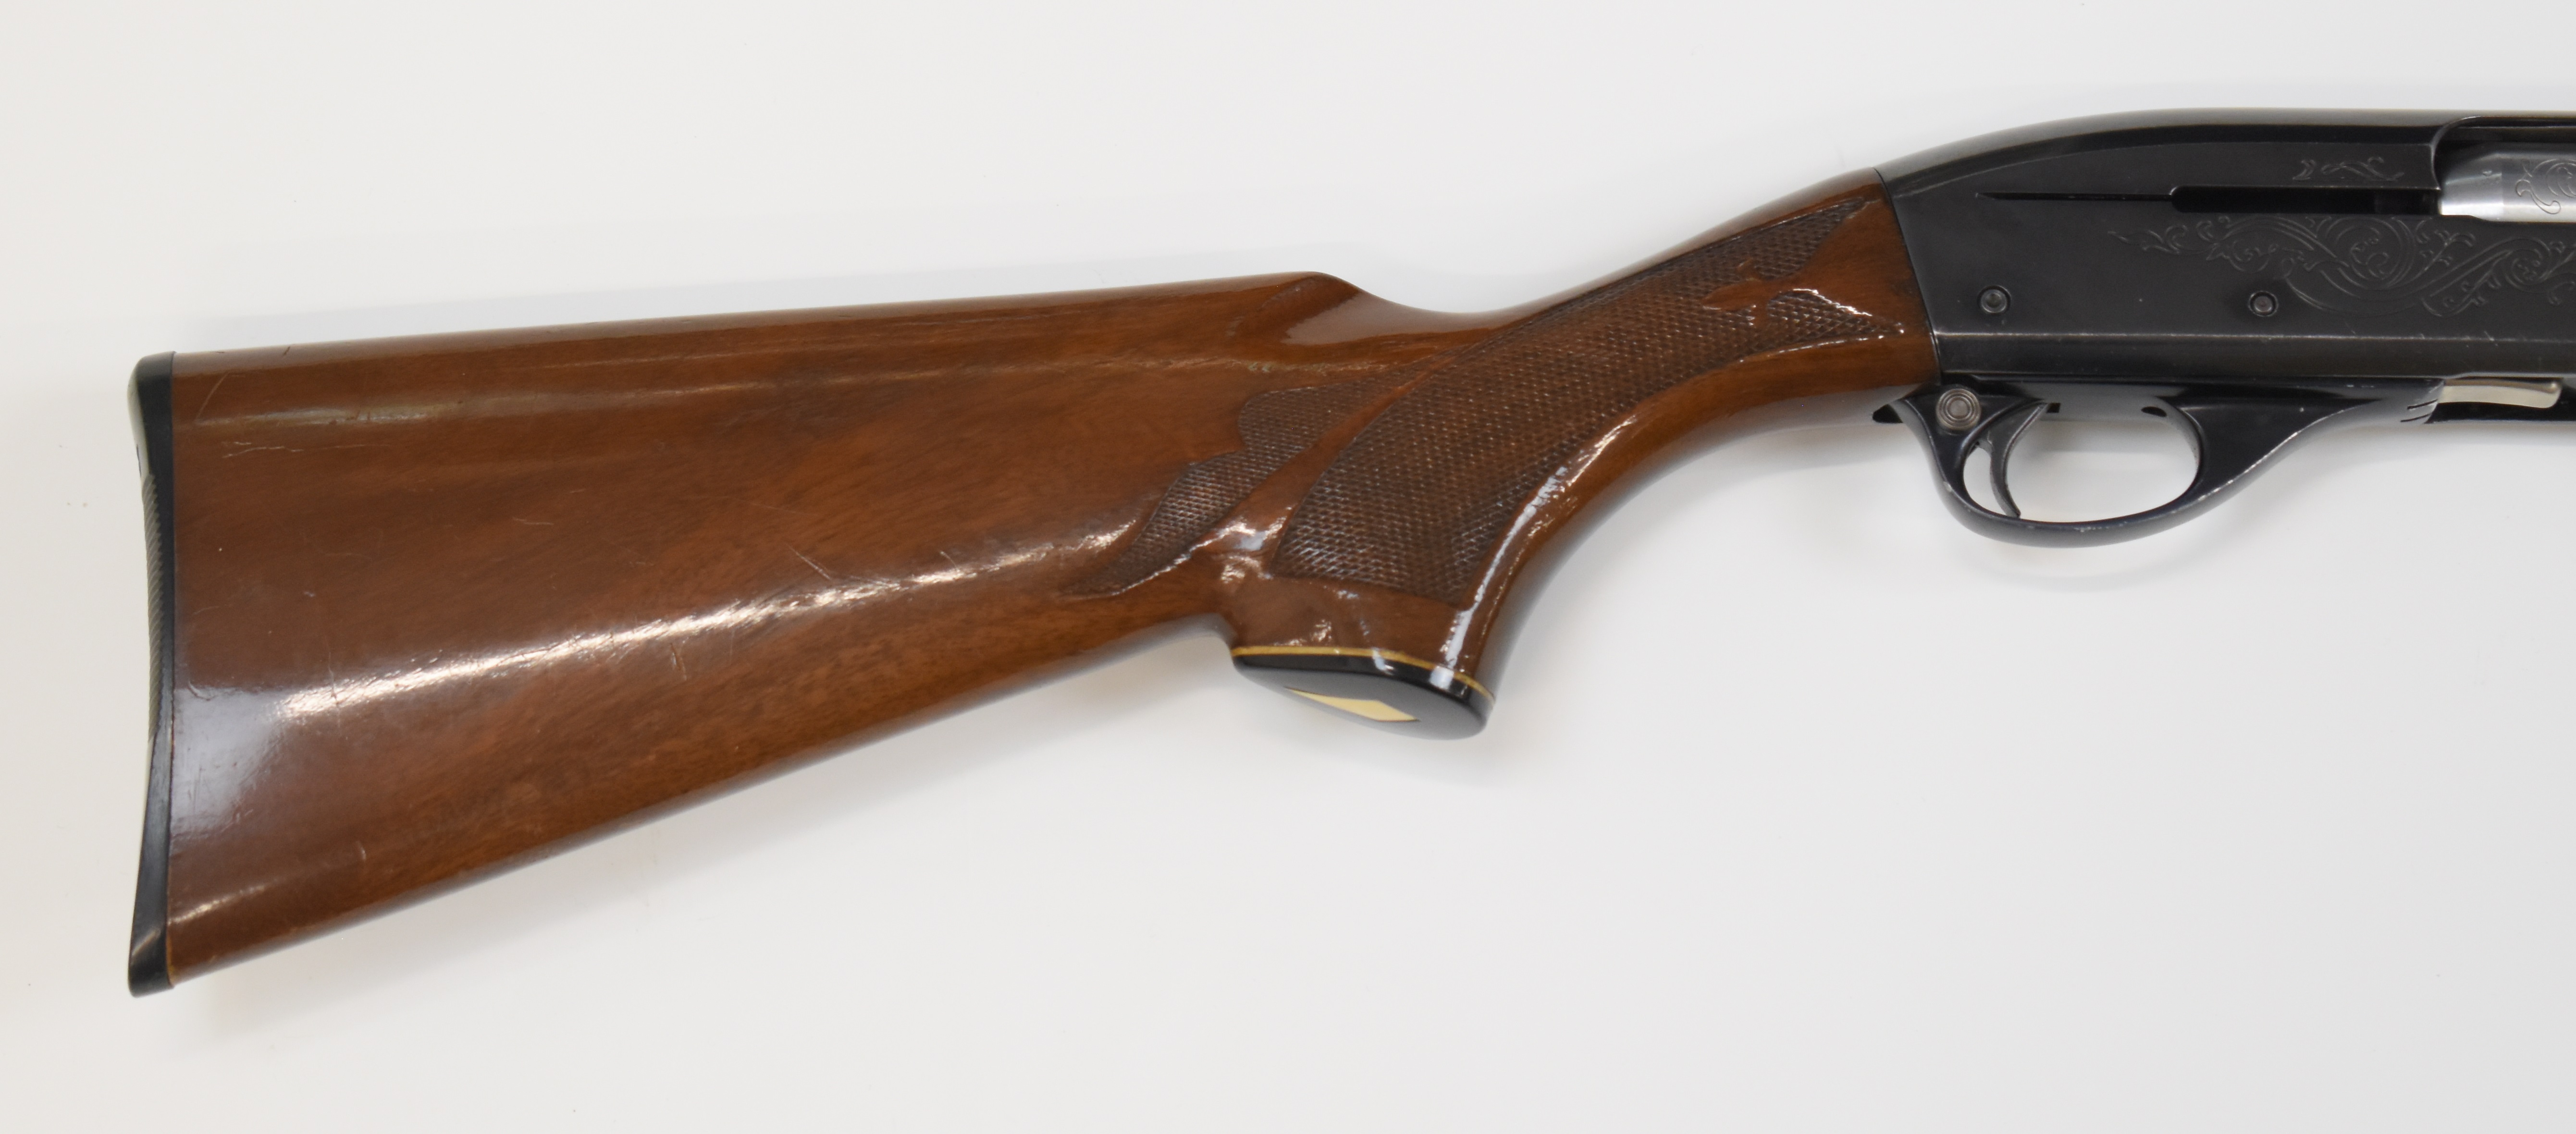 Remington Model 1100 12 bore 3-shot semi-automatic shotgun with ornately carved and chequered semi- - Image 3 of 10